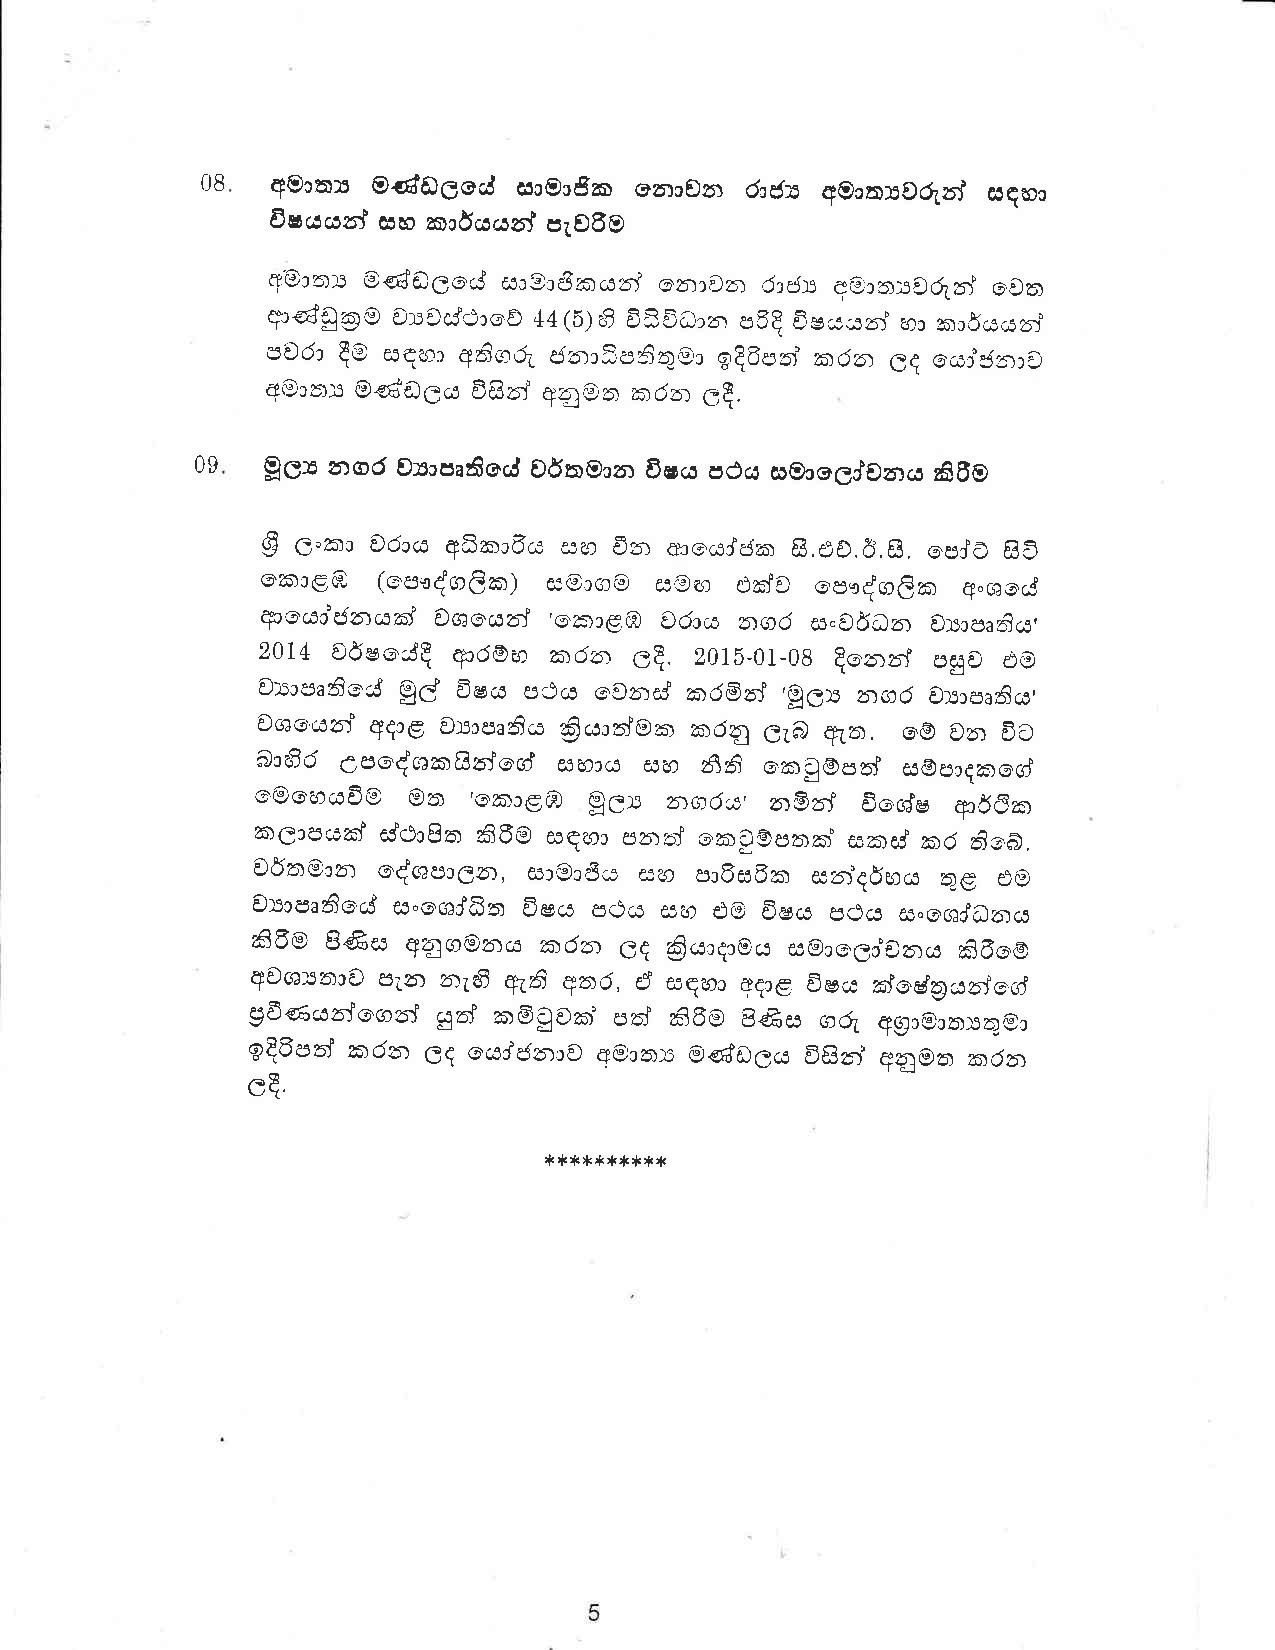 Cabinet Decision S on 10.12.2019 page 005